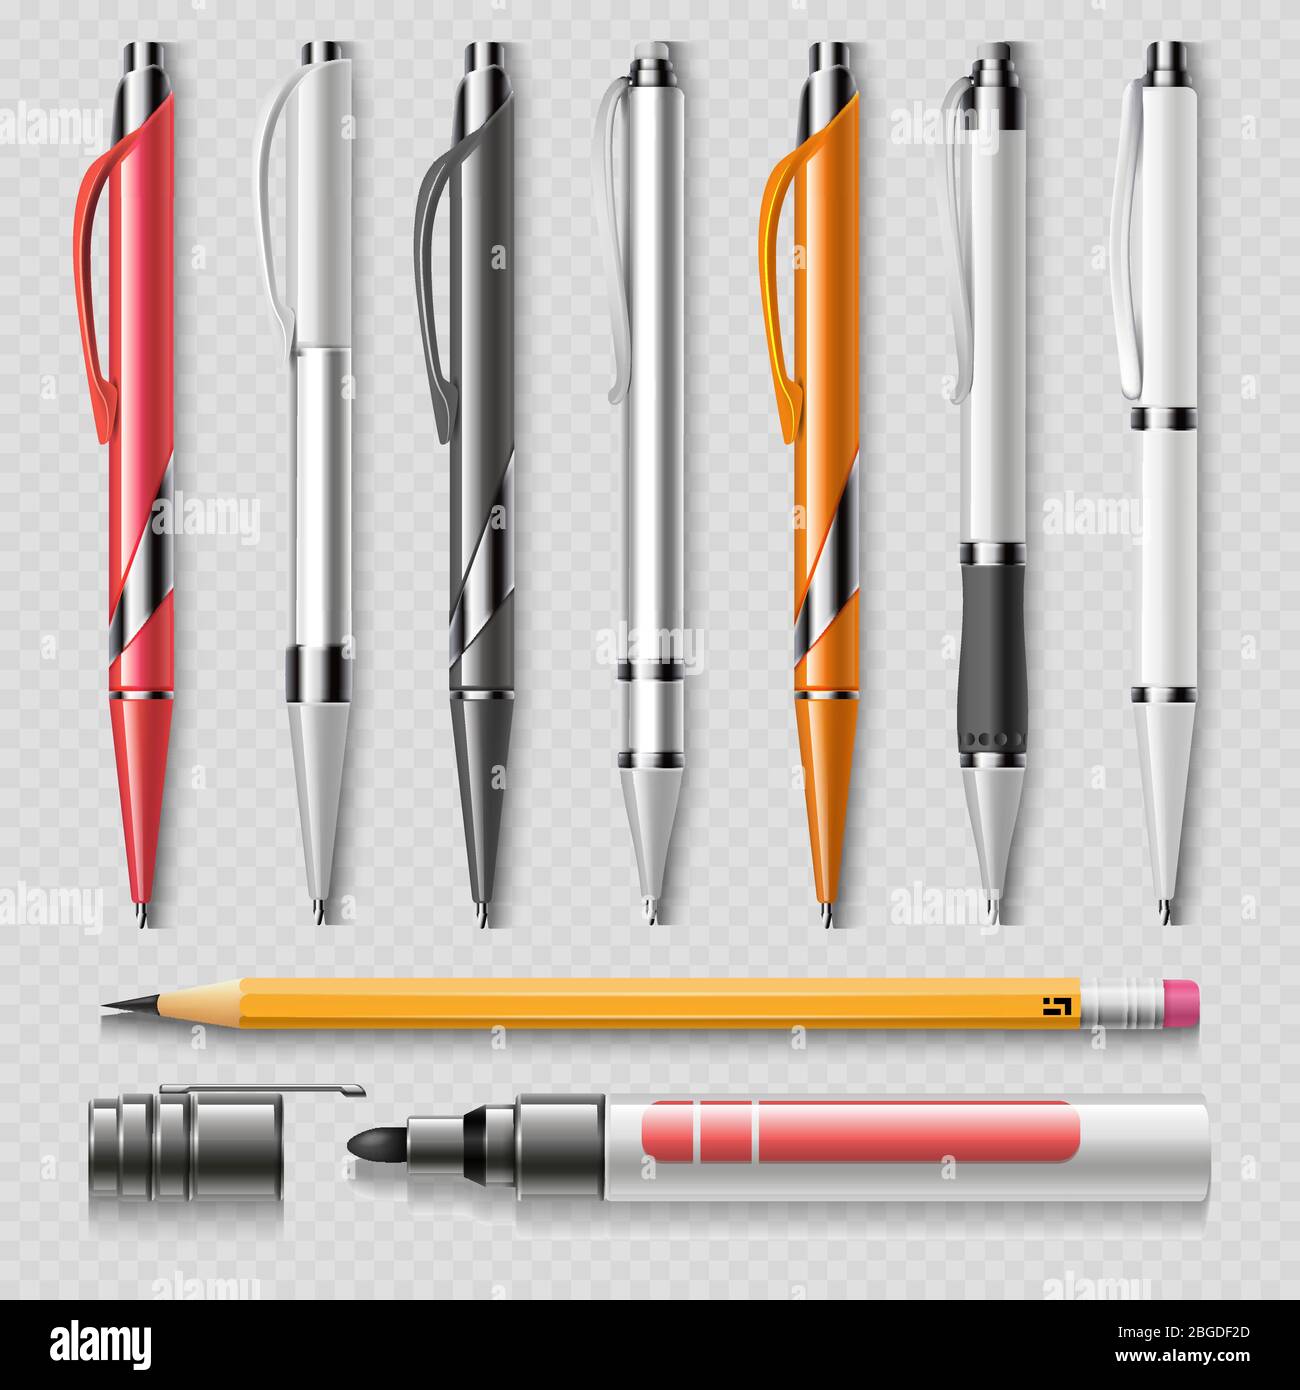 https://c8.alamy.com/comp/2BGDF2D/realistic-office-stationery-isolated-on-transparent-background-pens-pencil-and-marker-realistic-vector-office-stationery-pen-and-marker-illustrati-2BGDF2D.jpg